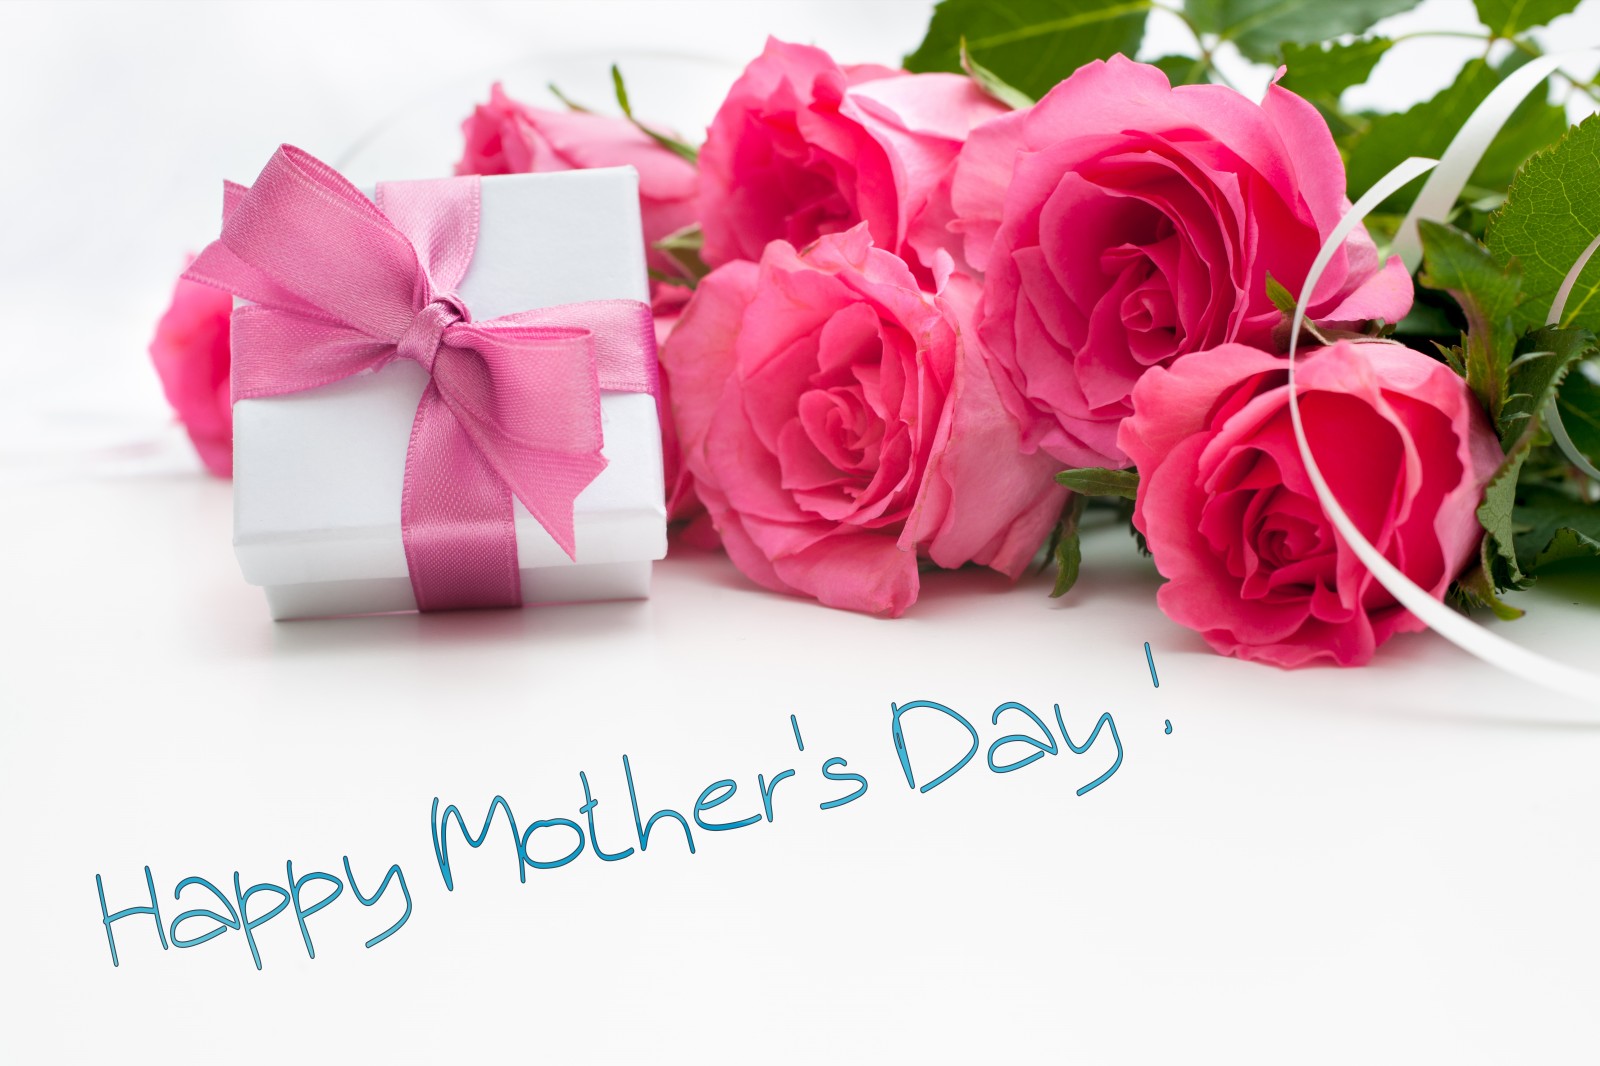 100+] Mothers Day Wallpapers | Wallpapers.com